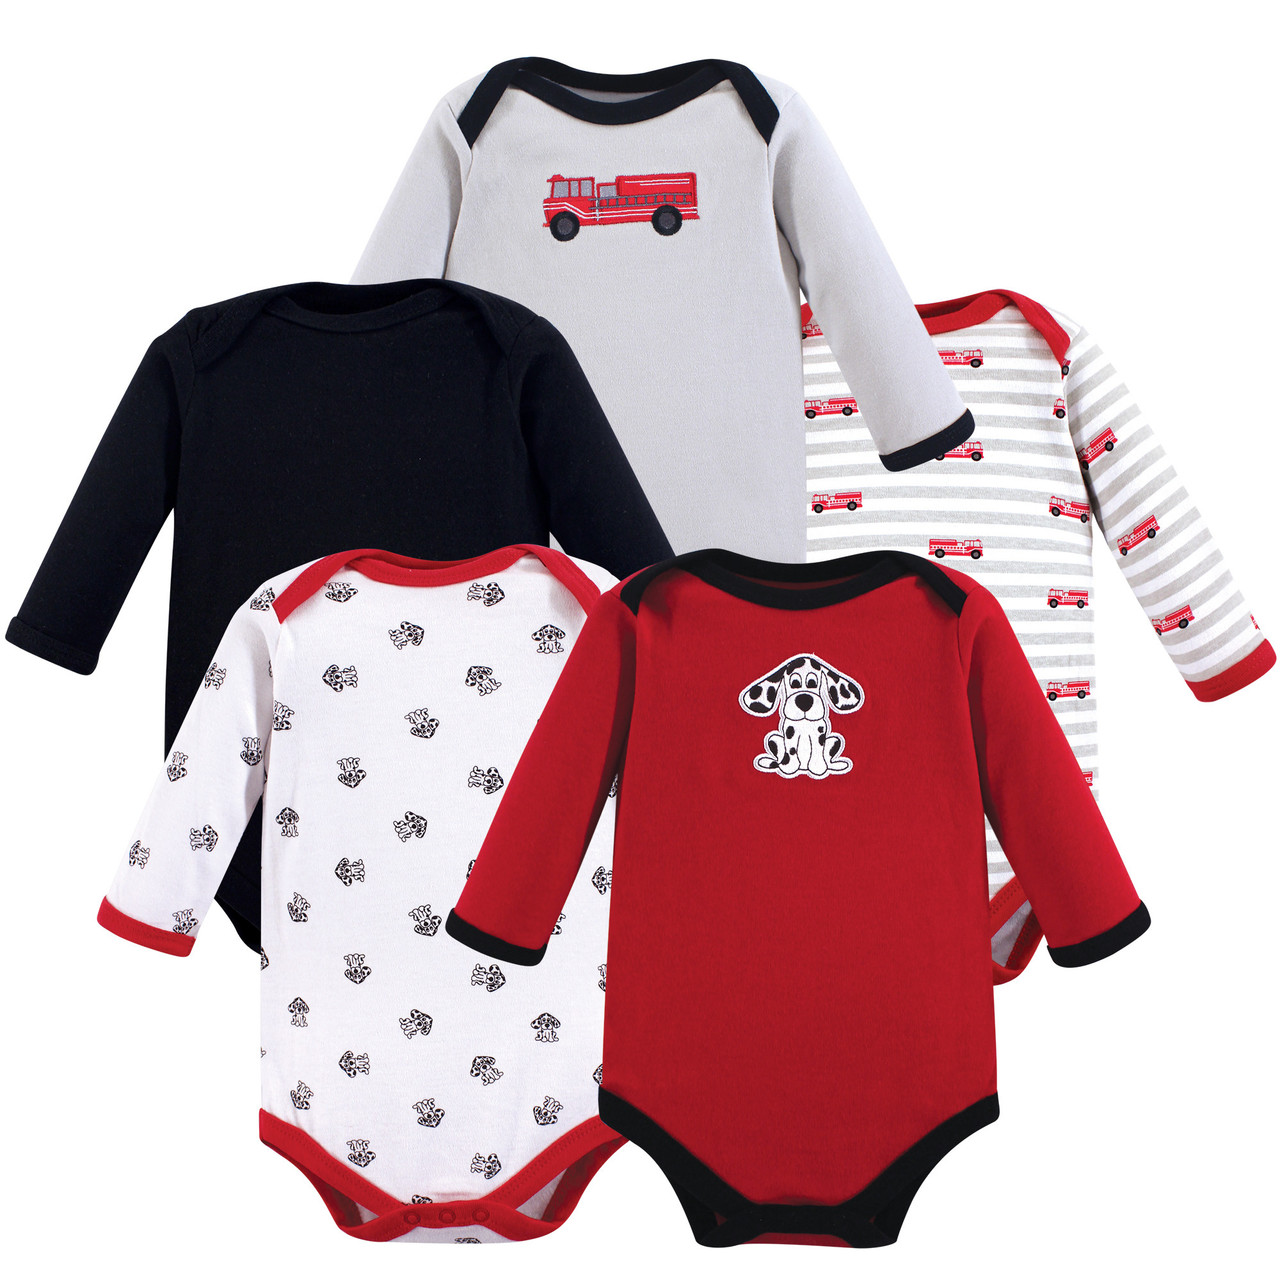 Luvable Friends Long-Sleeve Bodysuits, 5-Pack, Fire Truck | Baby and ...